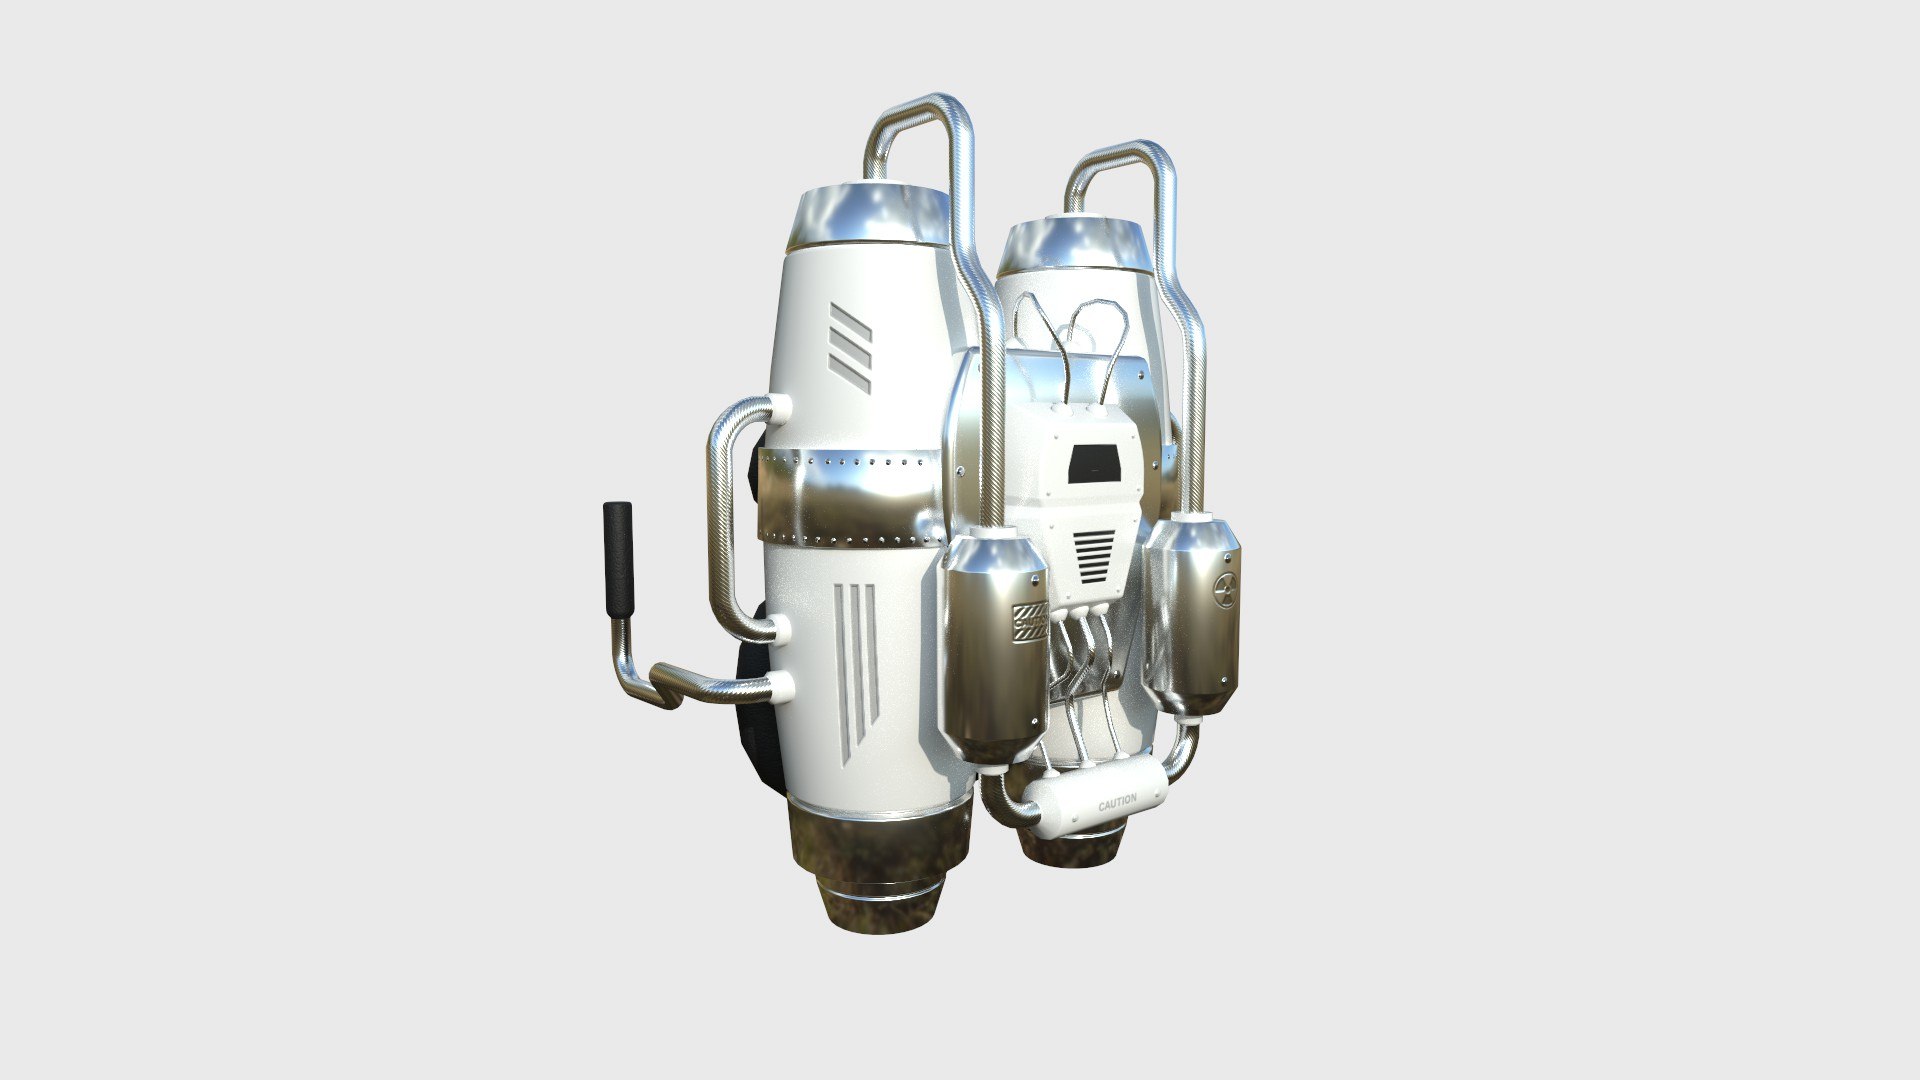 10 Jetpacks A Collection - SciFi Character Design VR / AR / low-poly